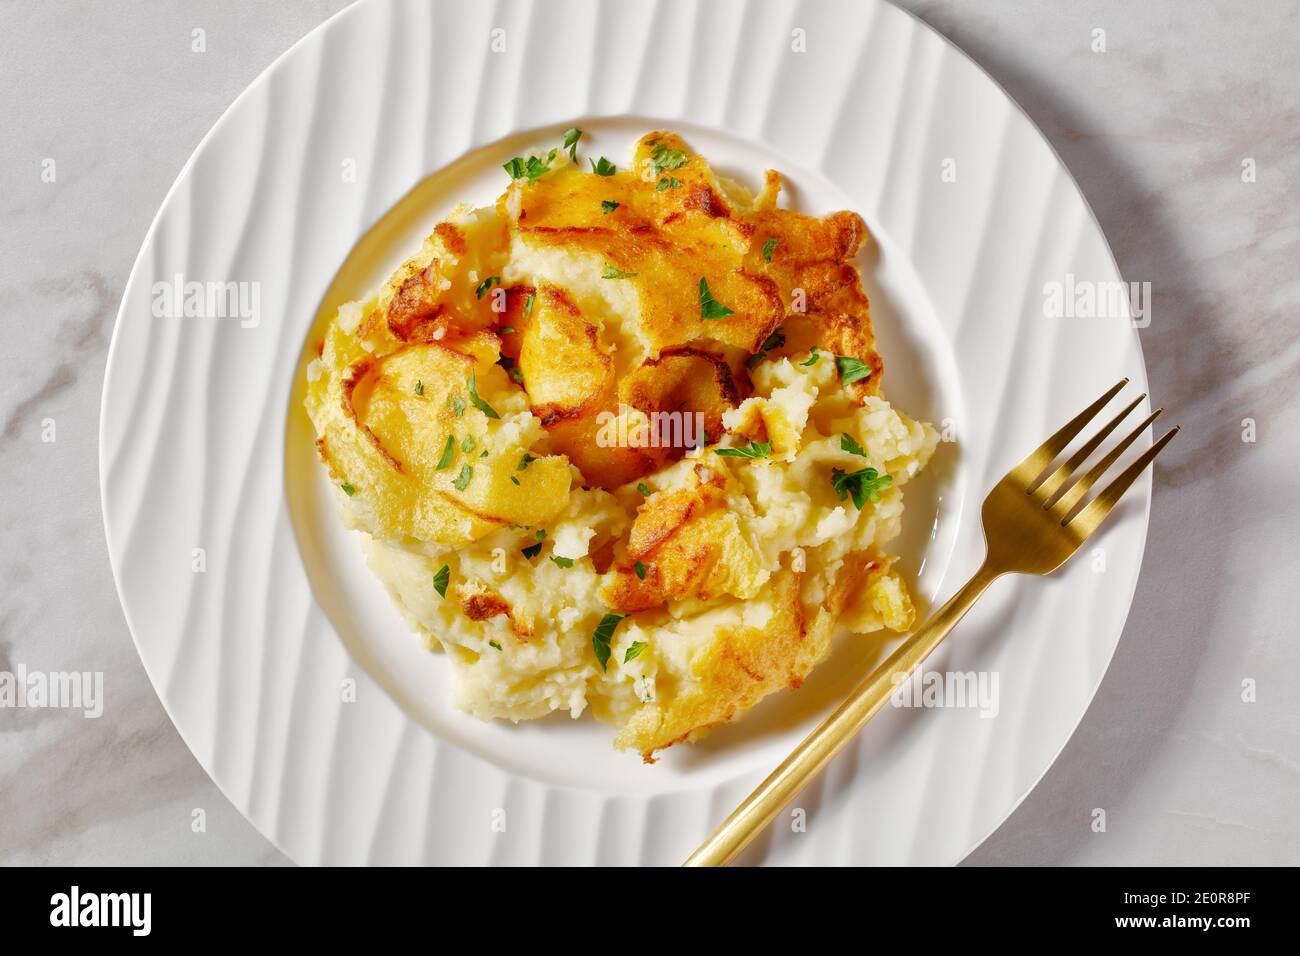 portion of baked Mashed Potato Casserole sprinkled with parsley on a white plate with golden fork, on a marble table, horizontal view from above Stock Photo